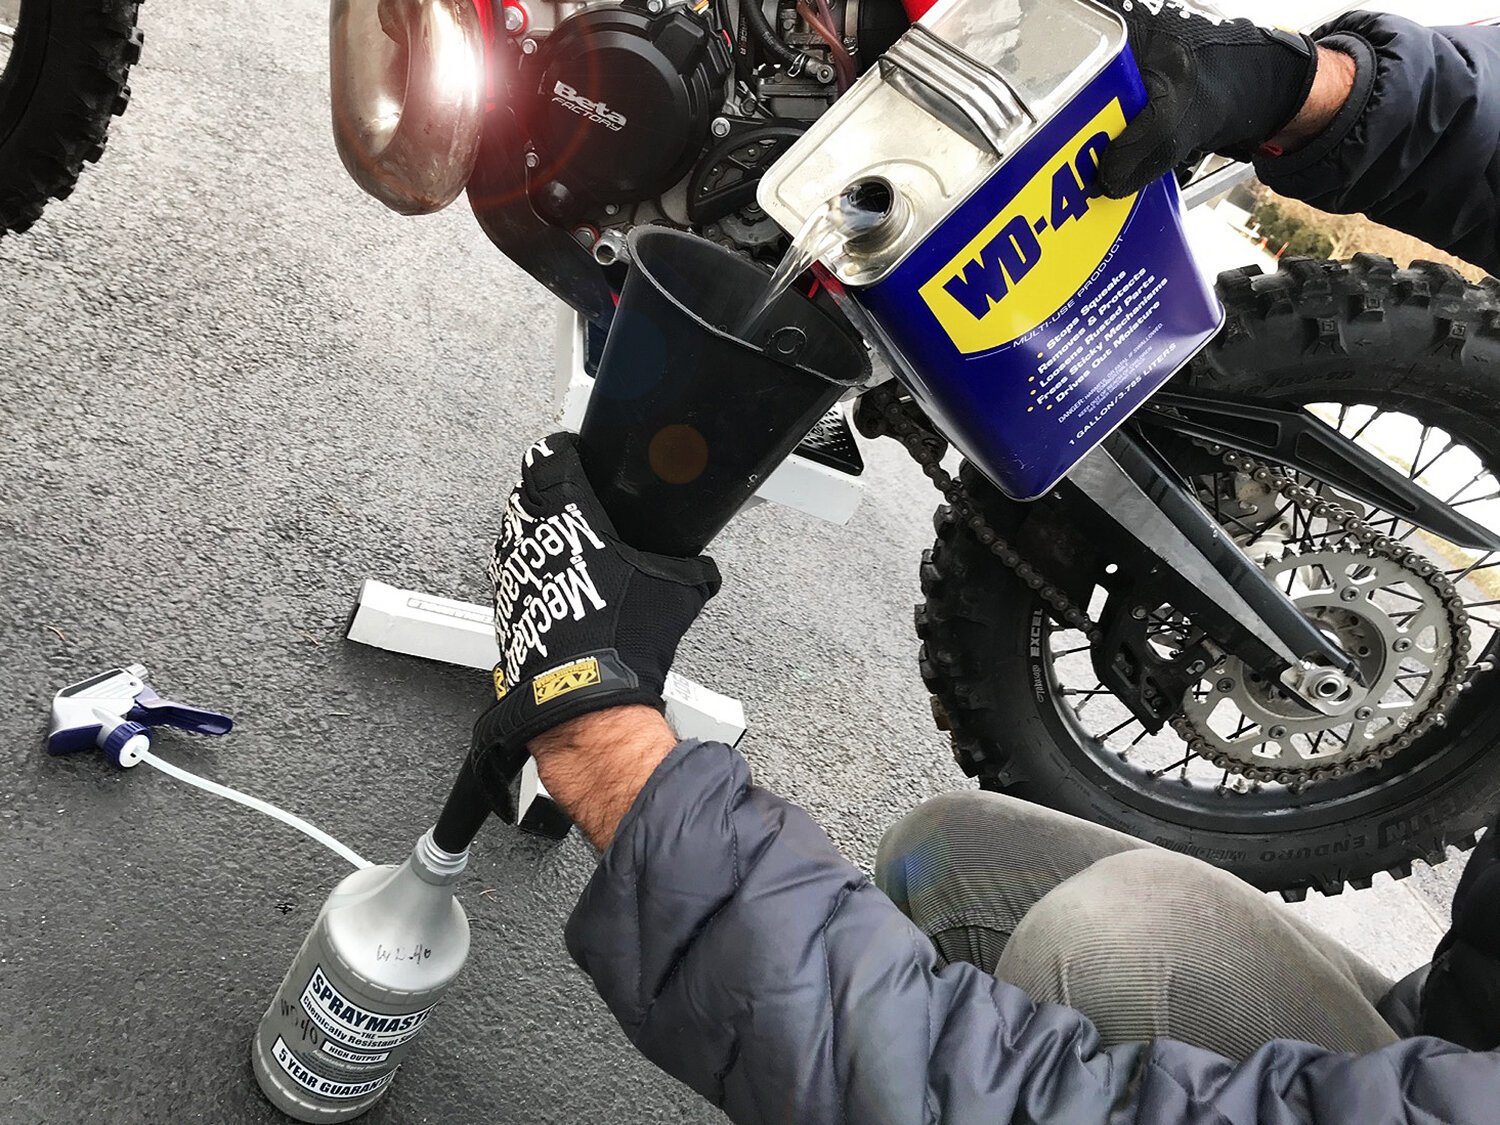 Prepping bike with WD40 - essential maintenance for riders